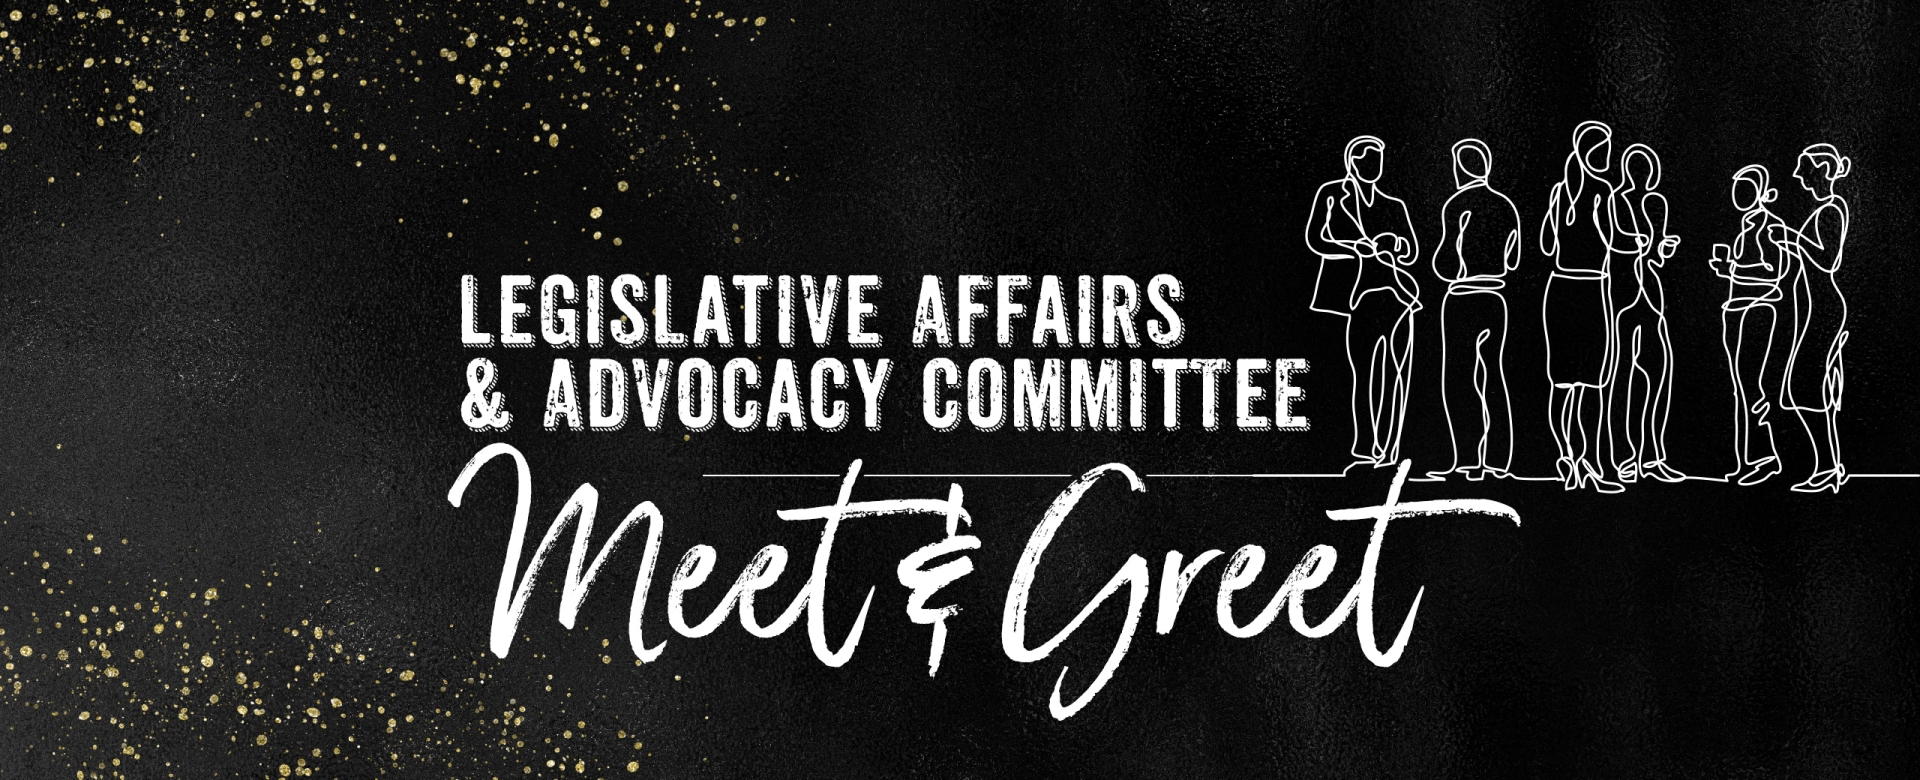 Legislative Affairs and Advocacy Committee Meet and Greet